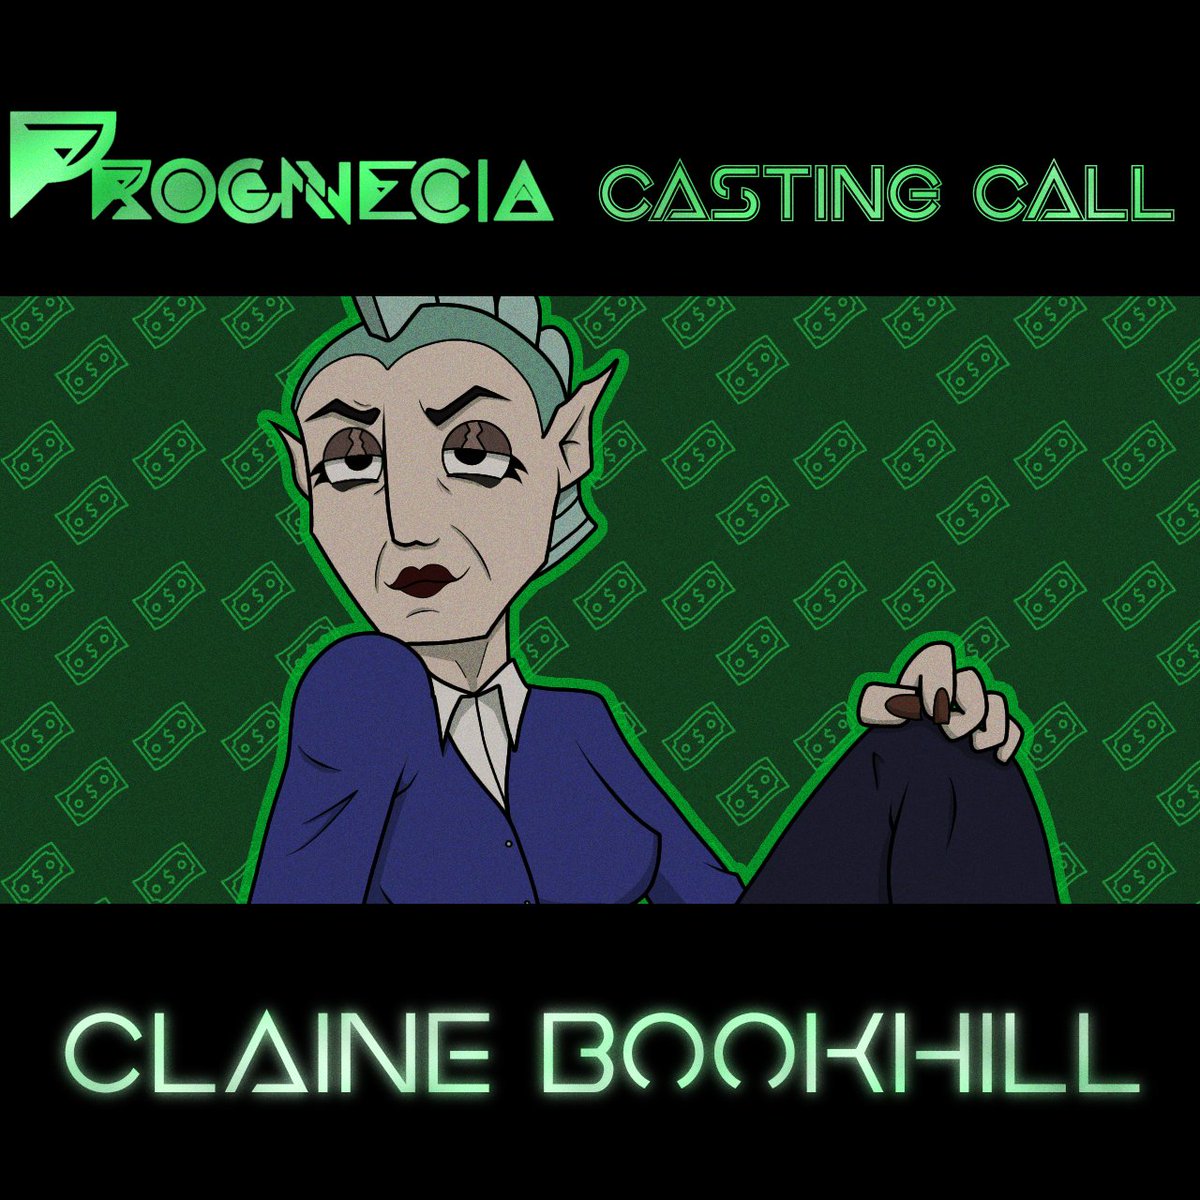 🎙🗣VA CASTING CALL🗣 🎙 - 1 F - Adult/Middle Aged - PAID (⚠️Student Budget⚠️/Can be discussed) Want a chance to play a stern exploitive girlboss billionaire? Show us your best and drop your demo reels below!🎤 ________________ #indieanimation #voiceactor #castincall